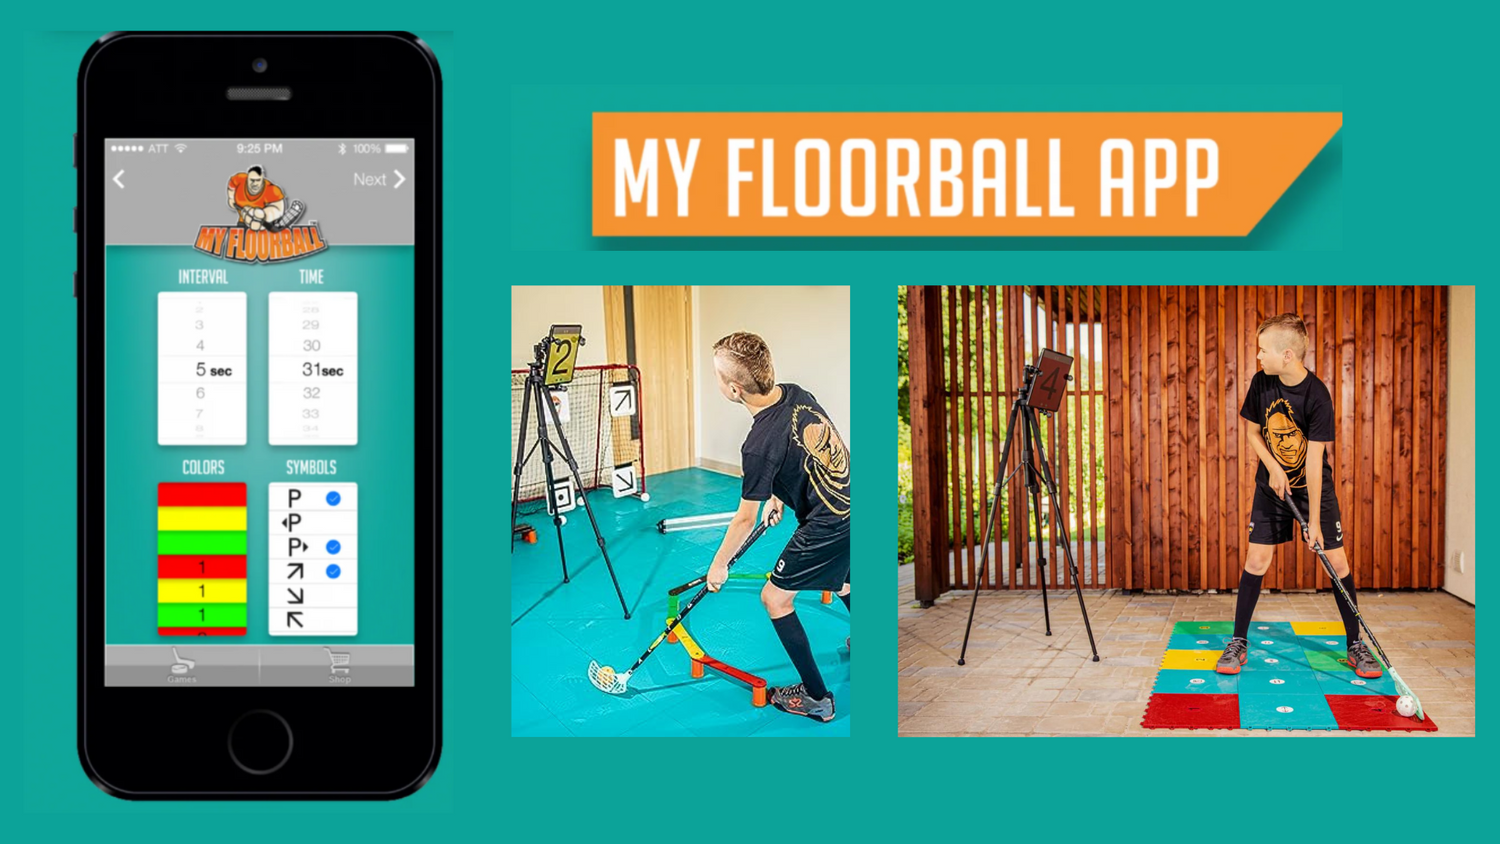 Stay injury - free with the My Floorball App: Your Guide to Safe Training